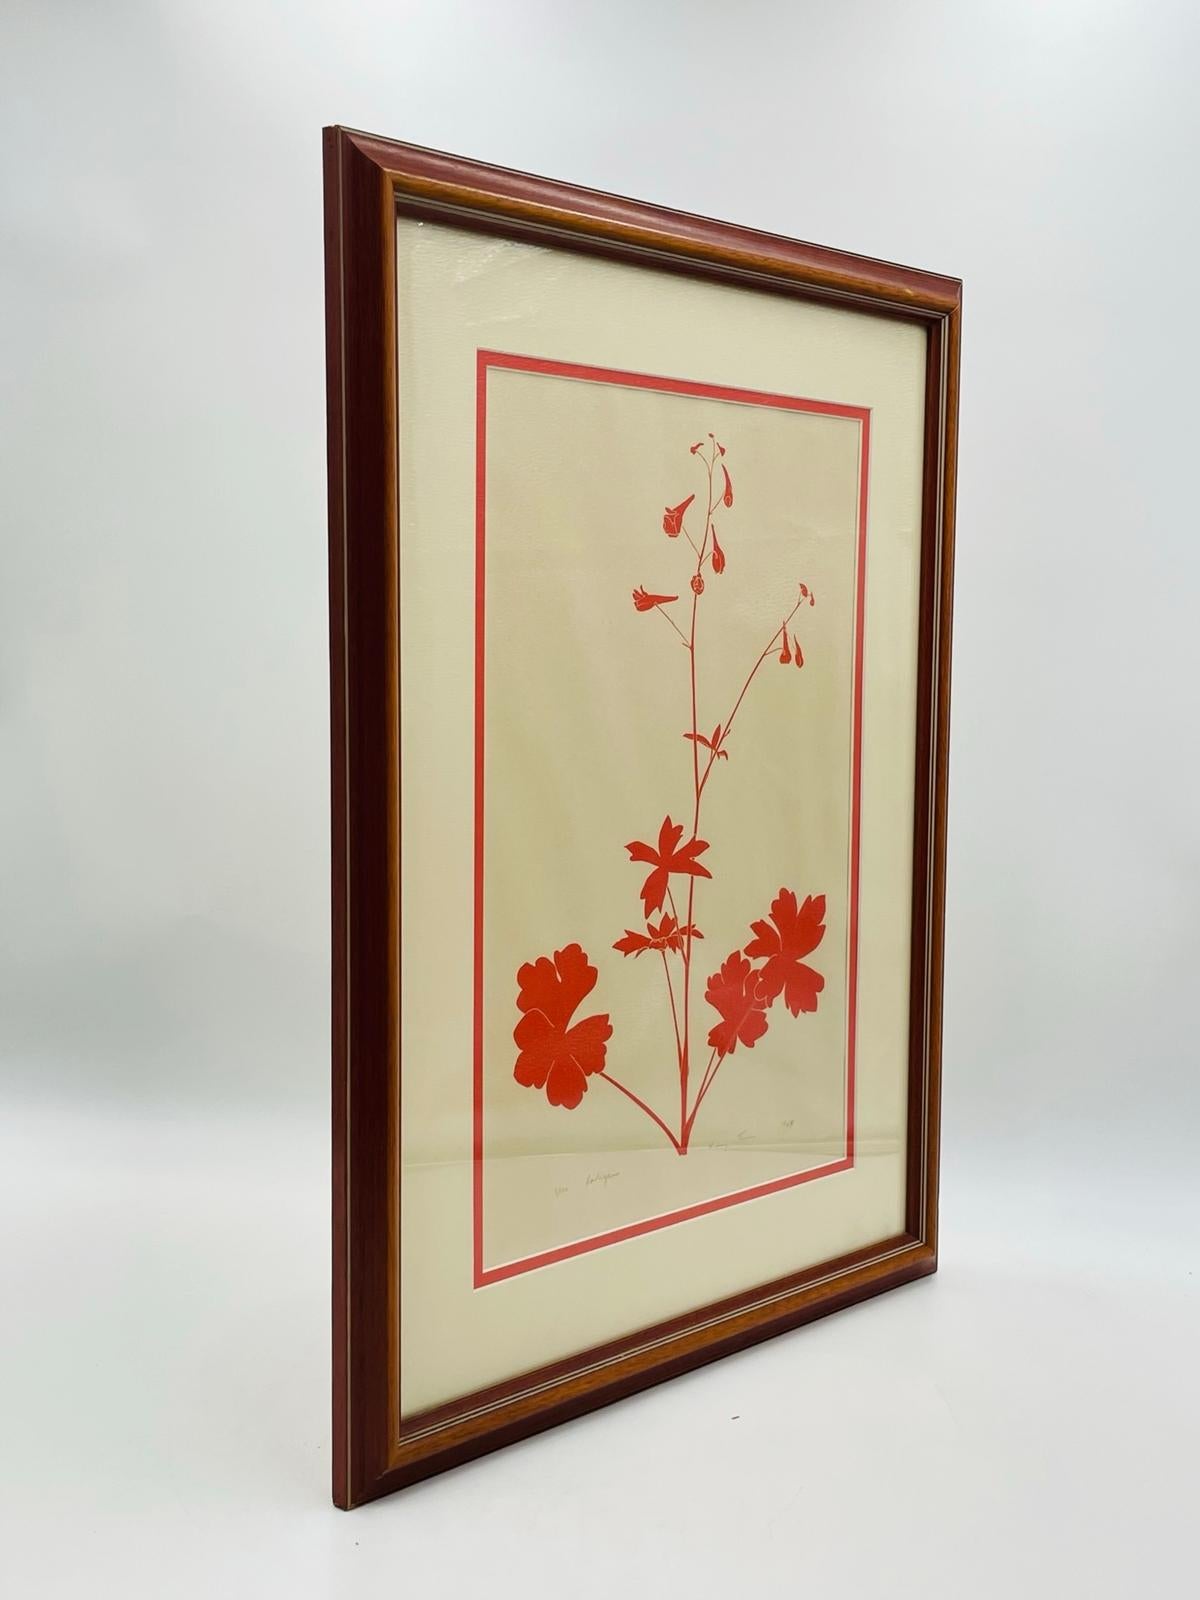 Linocut.
Year produced: 1964
Artist: Henry Evans.
Country: United States of America

Introducing the Botanical Linocut by Henry Evans, Hand Signed #1/100 and dated 1964. - a stunning piece of art that will add a touch of elegance to any room.